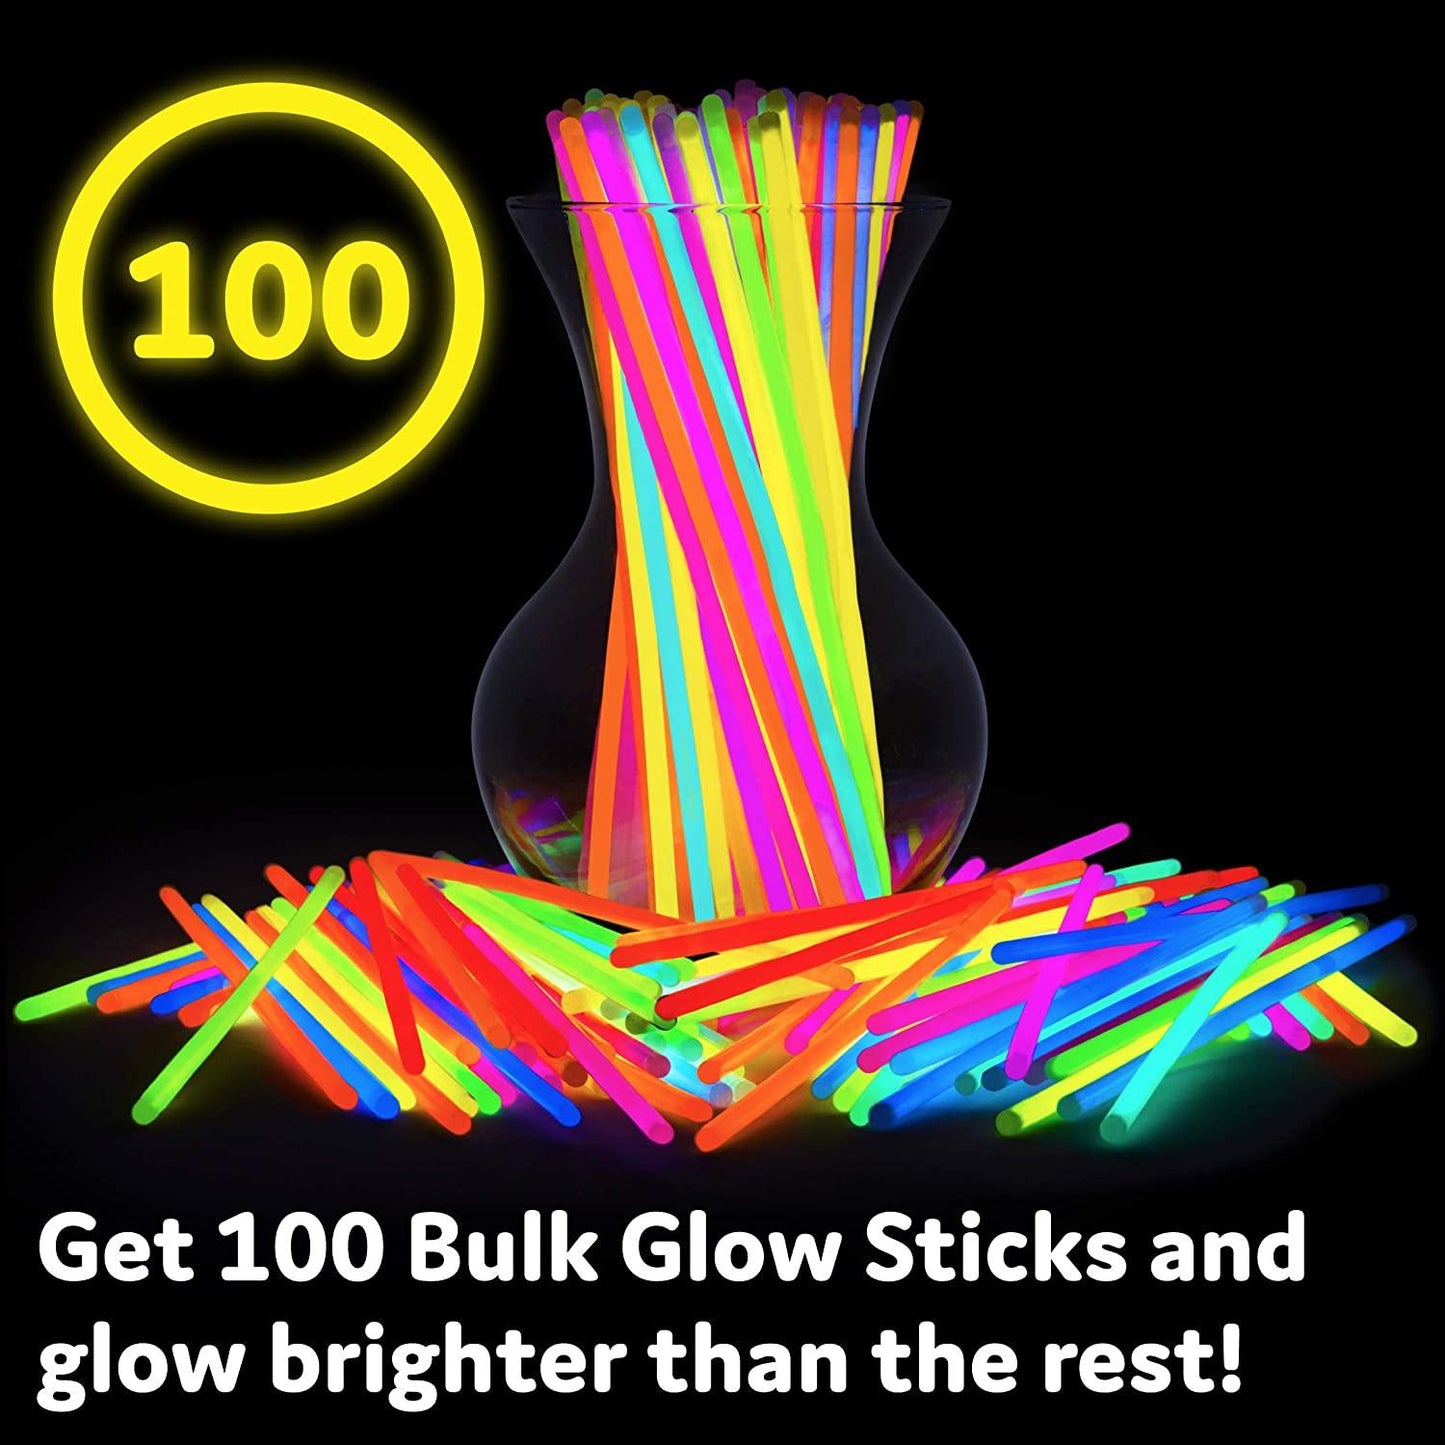 Glowstick Wedding Exit Ideas 8 Inch Glow in the Dark Light Up Sticks Glow Neon Party Decorations Favors with Connectors - If you say i do